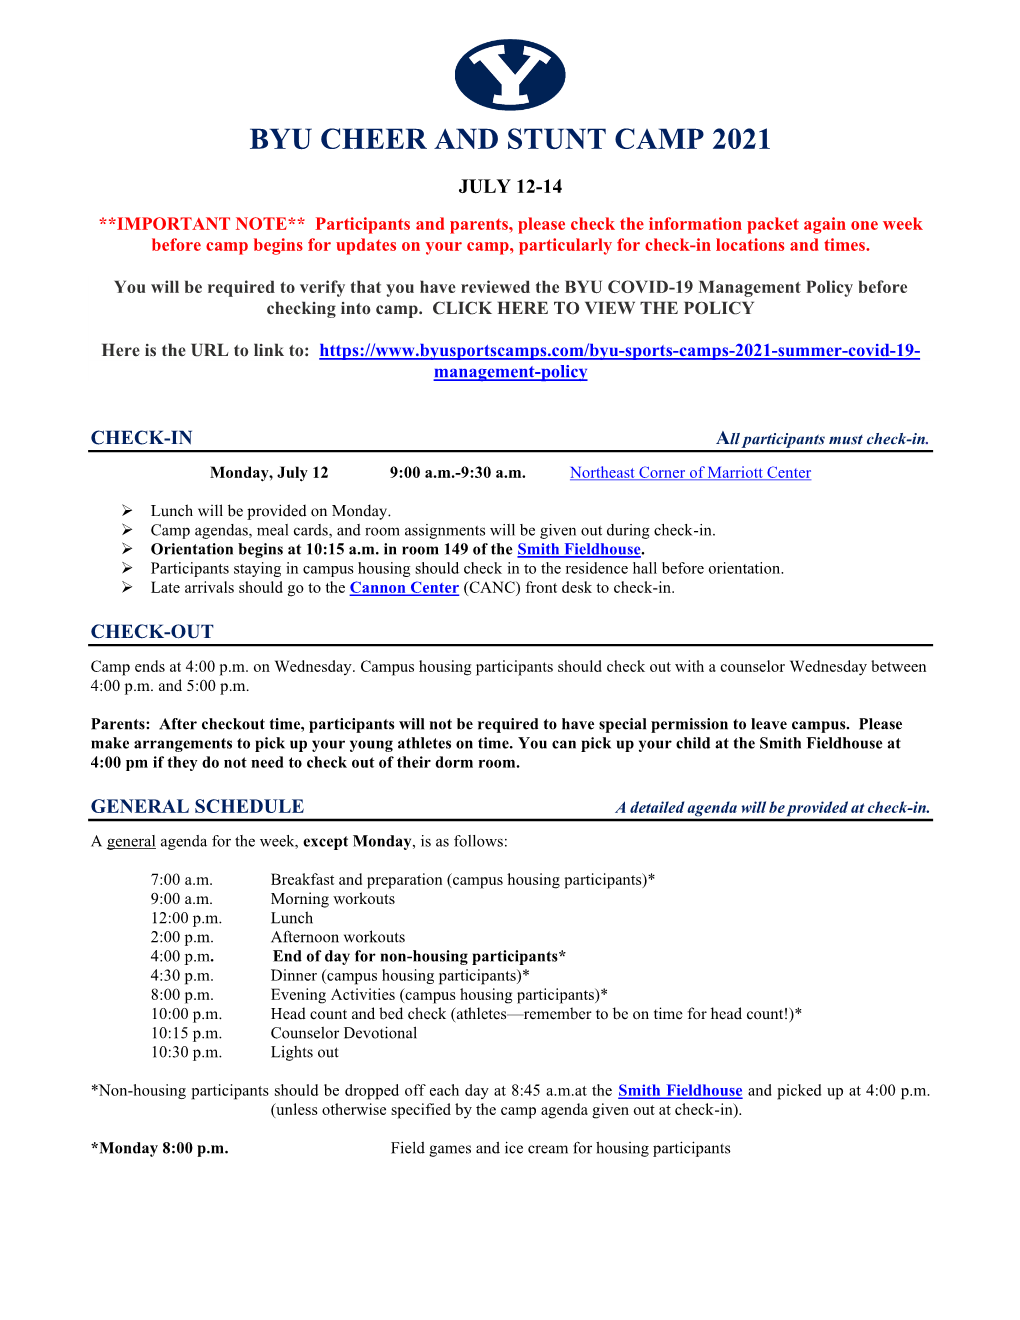 2021 Cheer and Stunt Information Packet